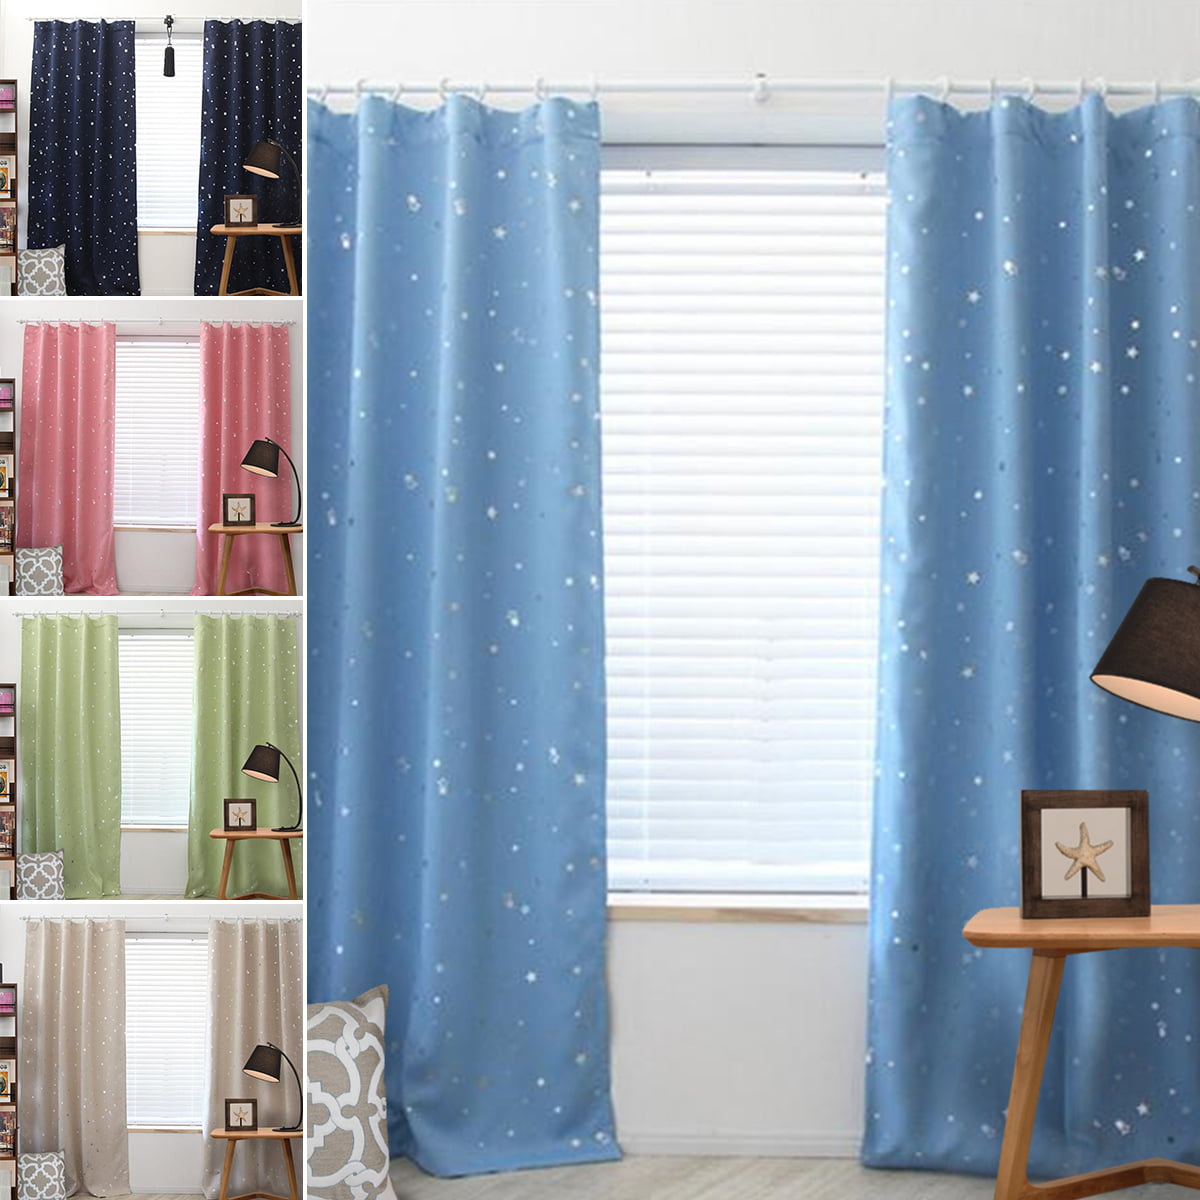 Thermal Insulated Curtains Blackout Window Curtain Panels Eyelet Hooks